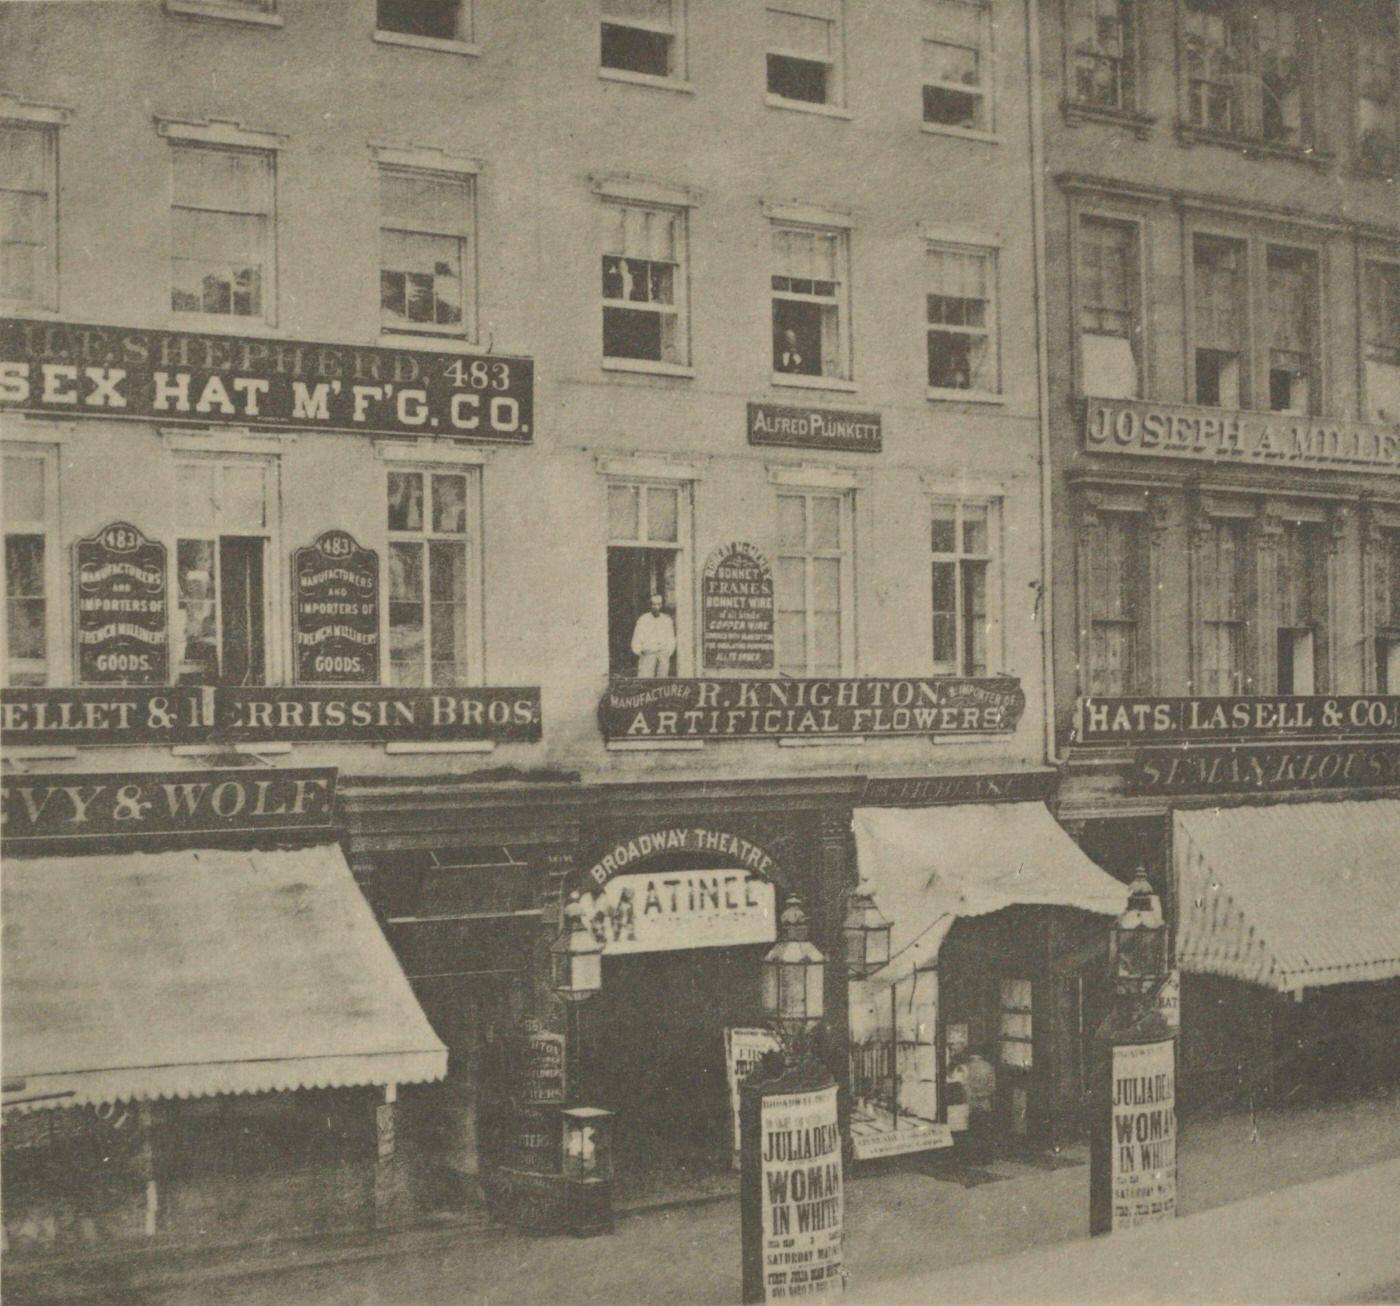 Broadway Theatre With Posters Announcing Julia Dean In The Woman In White, New York City, 1899